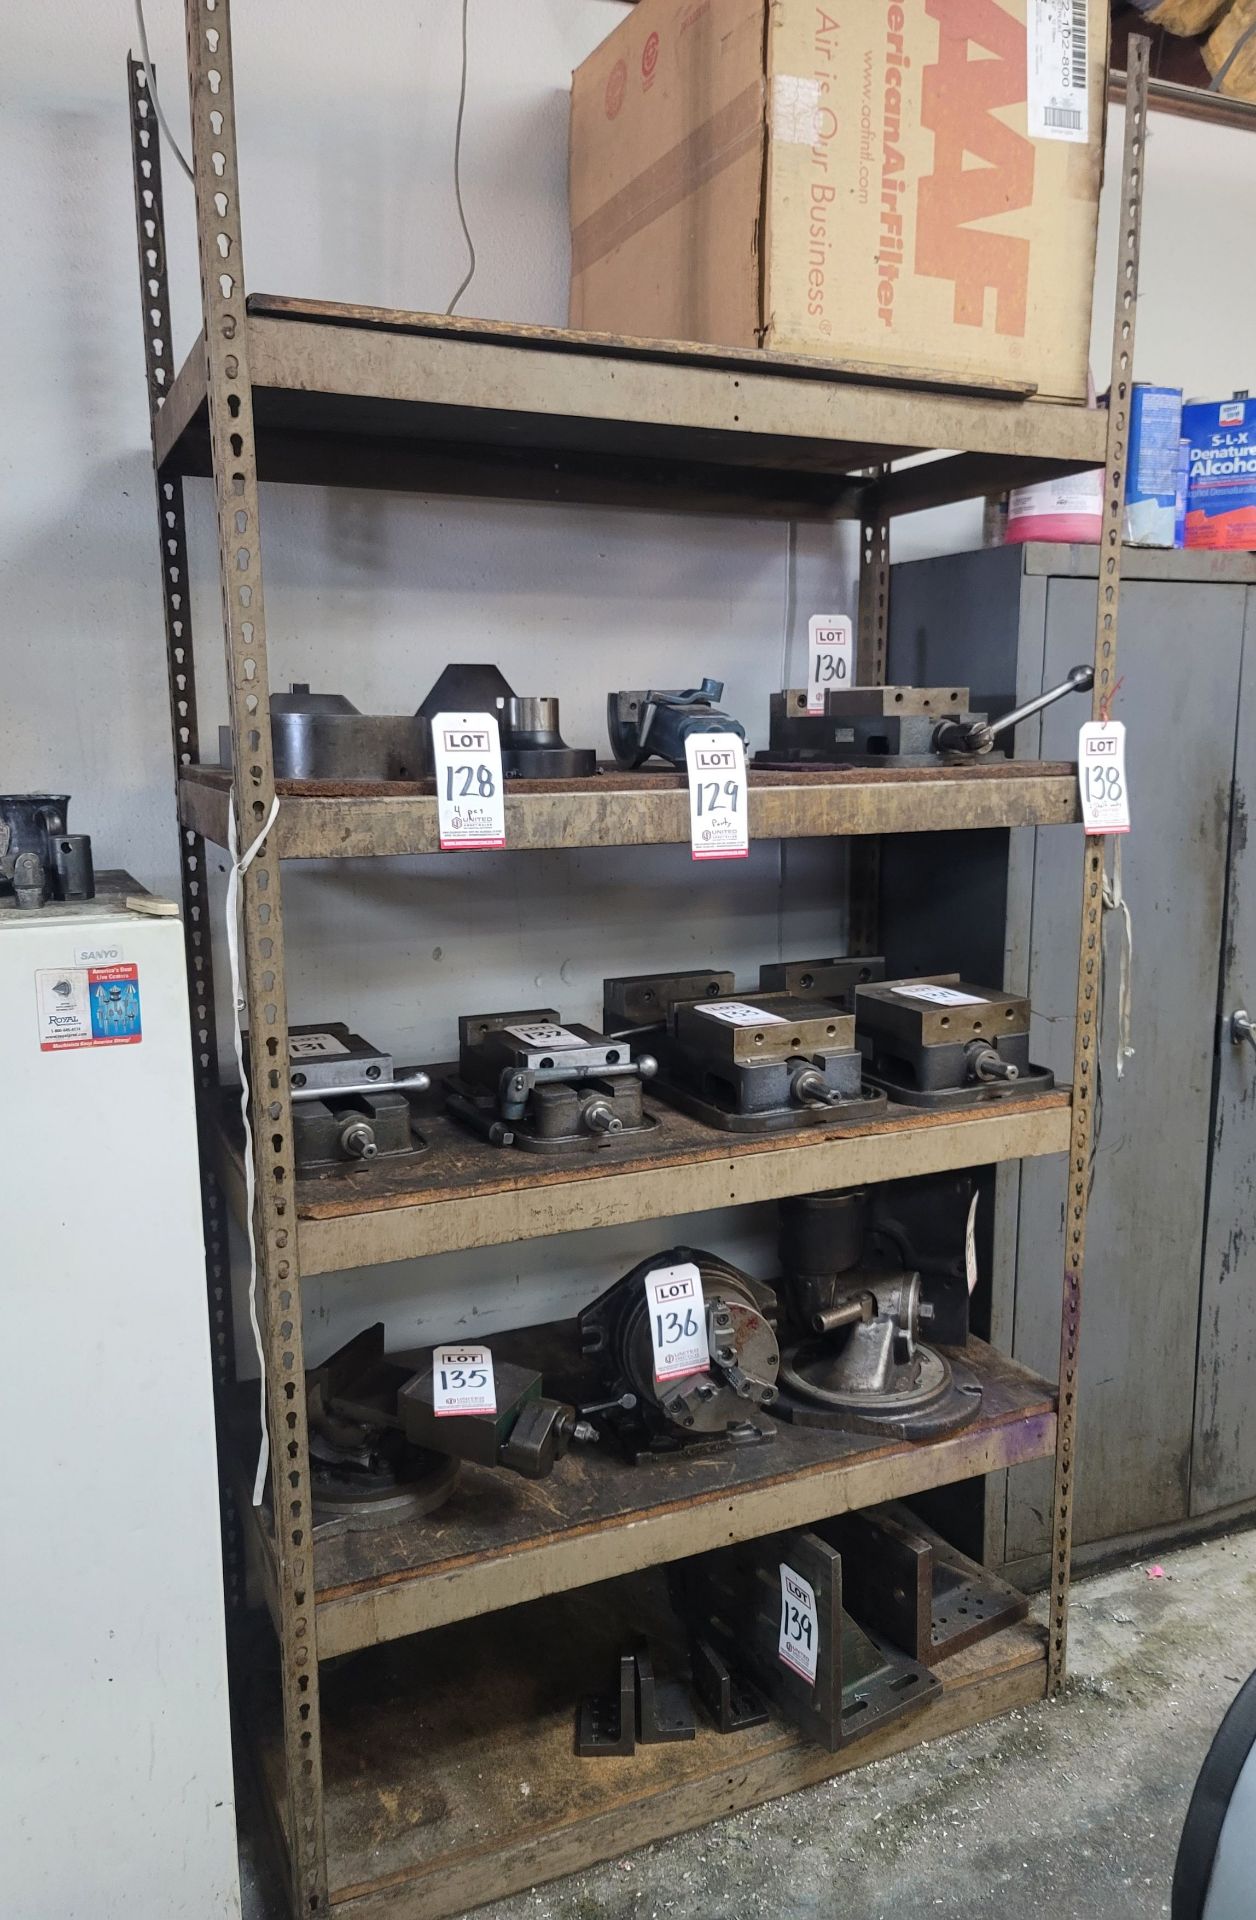 LOT - (2) STEEL SHELF UNITS: (1) 3' X 2' X 8' AND (1) 4' X 2' X 8', CONTENTS NOT INCLUDED - Image 2 of 2